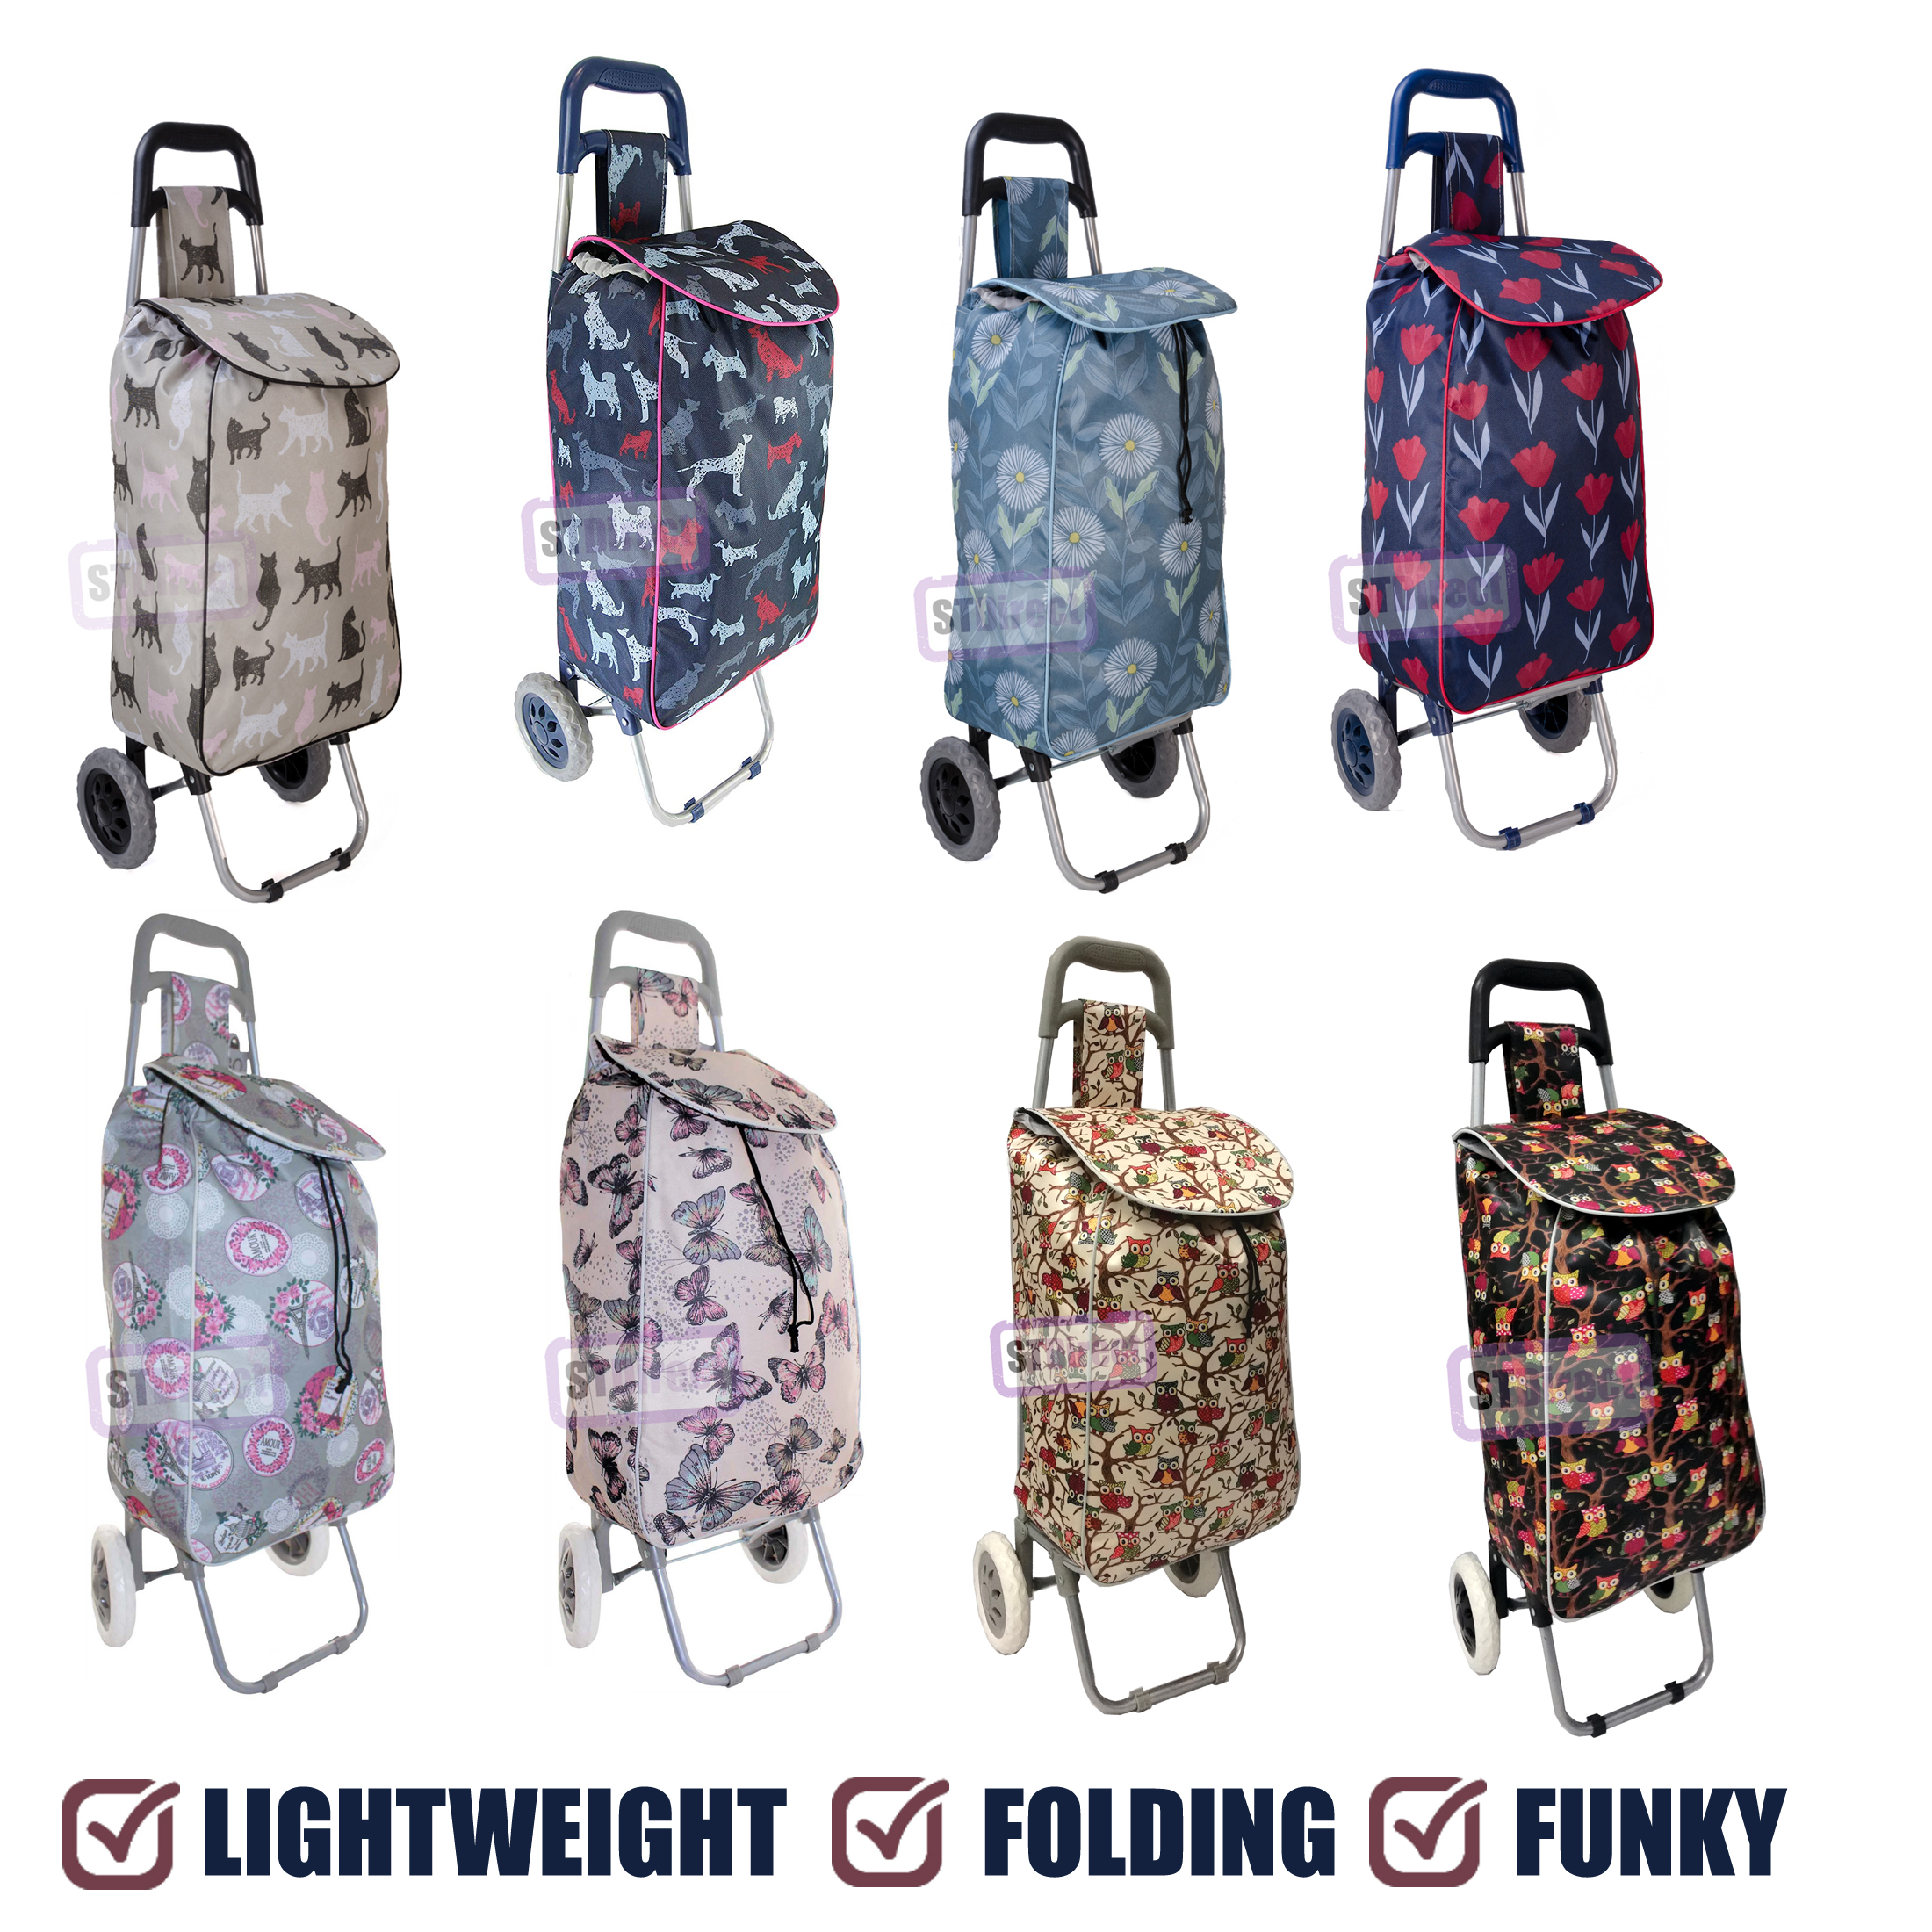 Hoppa Lightweight Shopping Trolley Butterflies Trendy Folding/Collapsible Push/Pull Carts Navy 